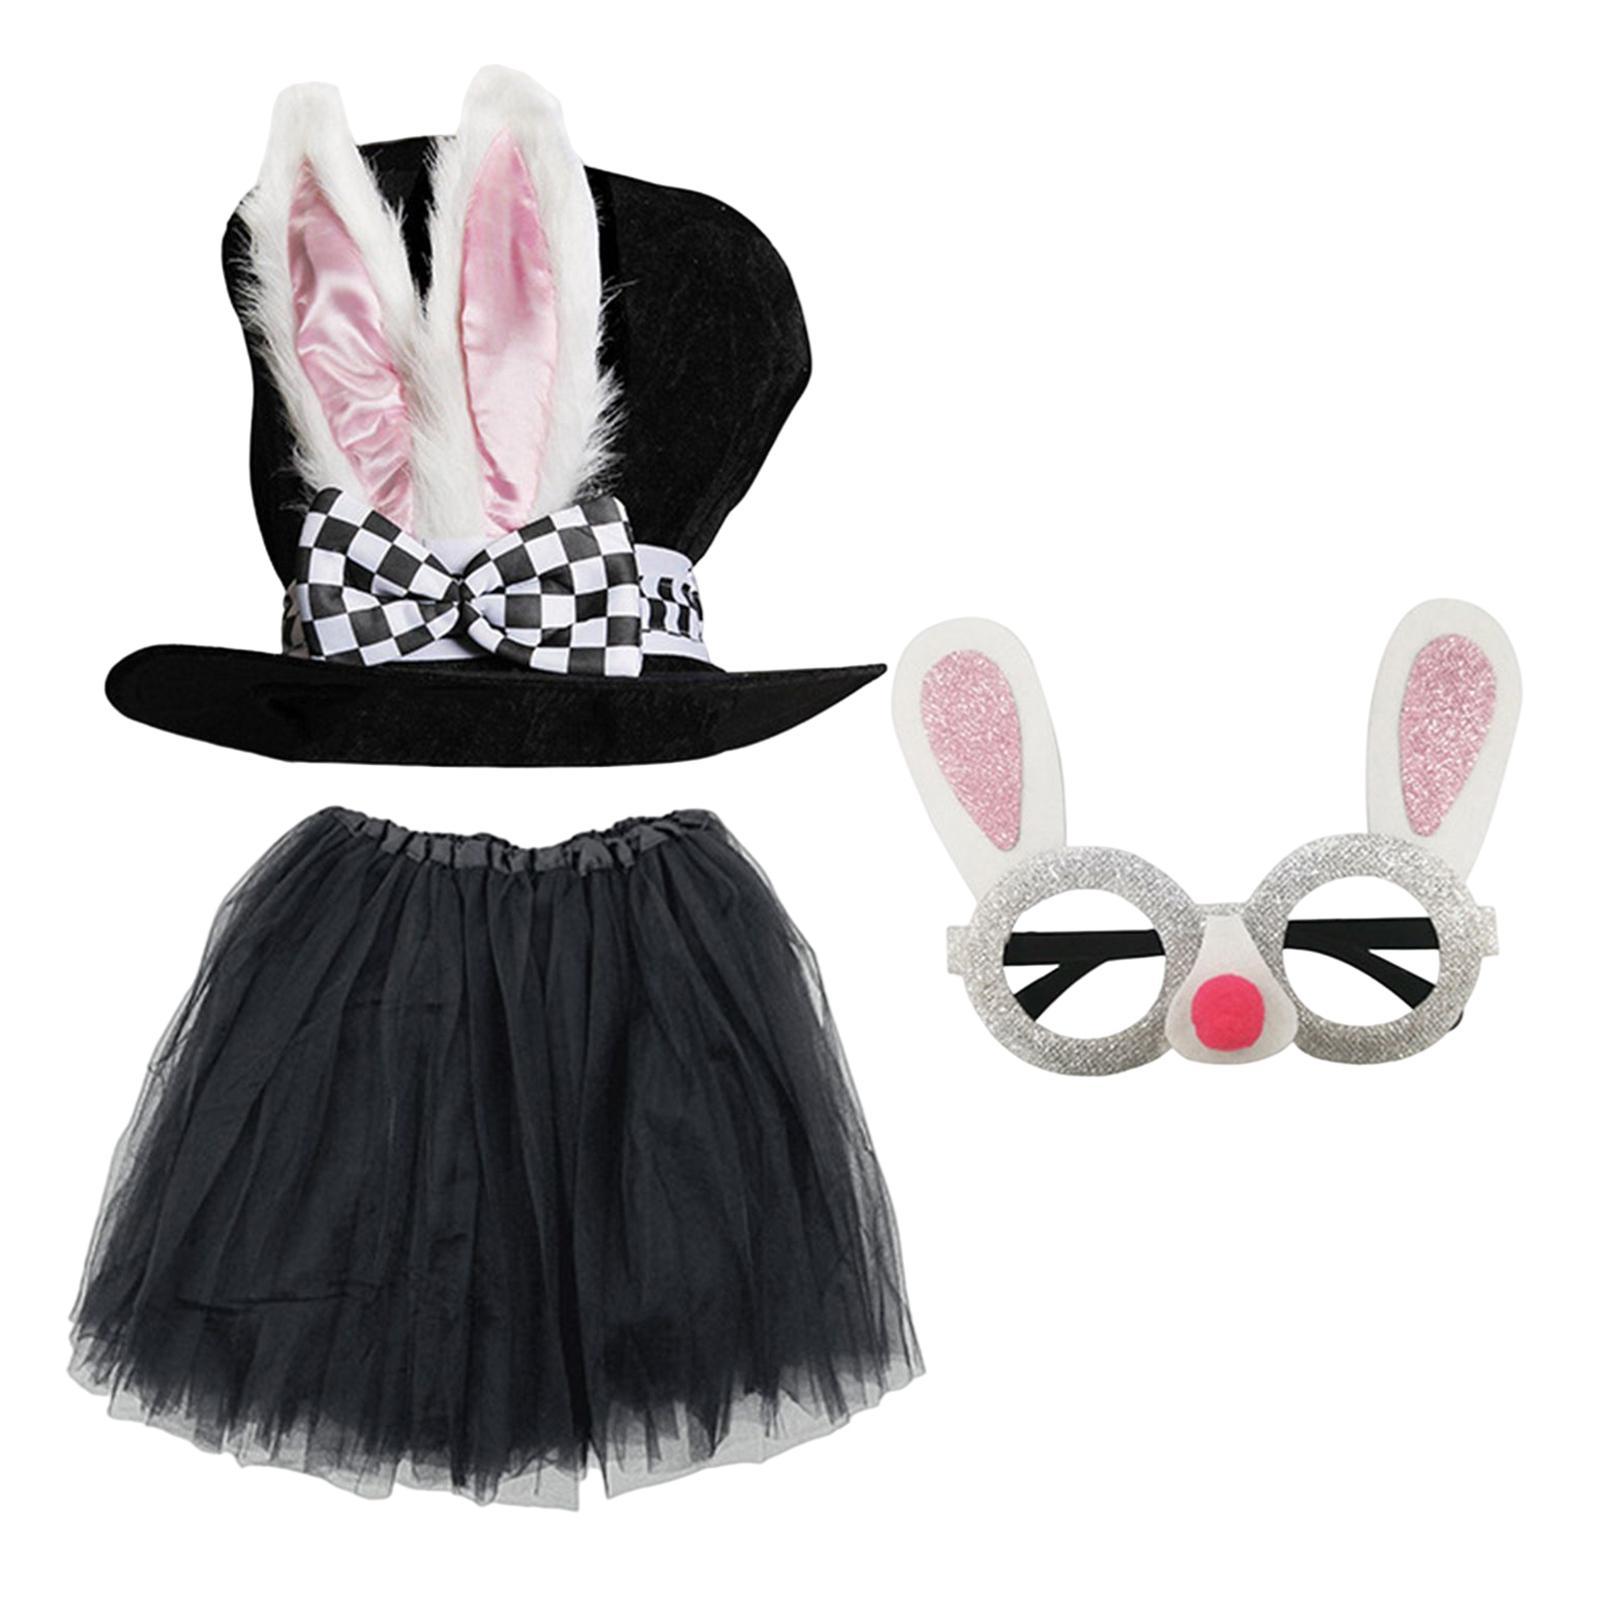 Bunny Costume Rabbit Topper Hat Skirt Glasses Animal Themed Parties for Kids Party Favors Carnival